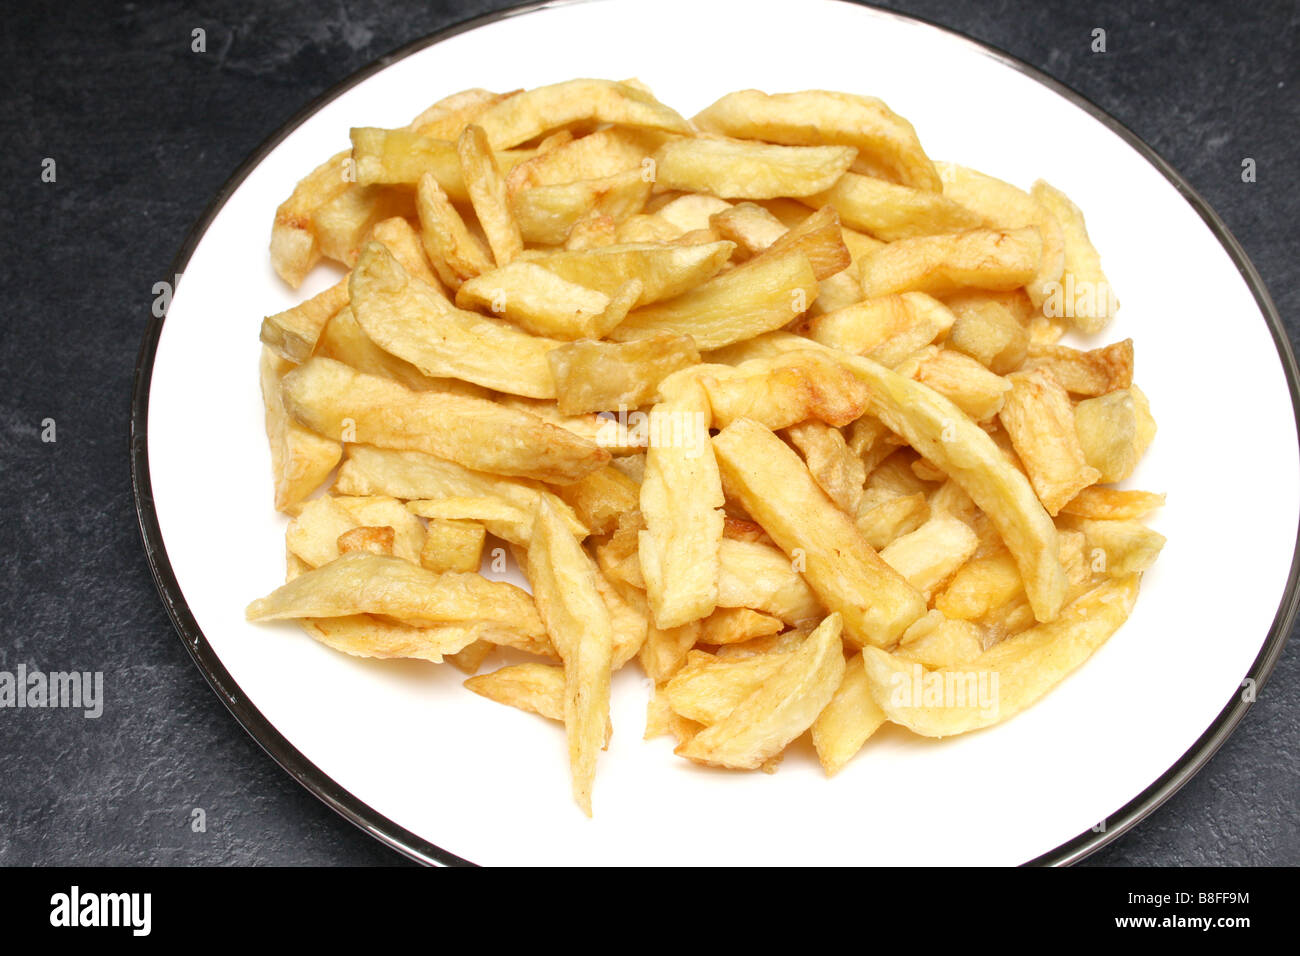 A plate of chip shop chips. Stock Photo